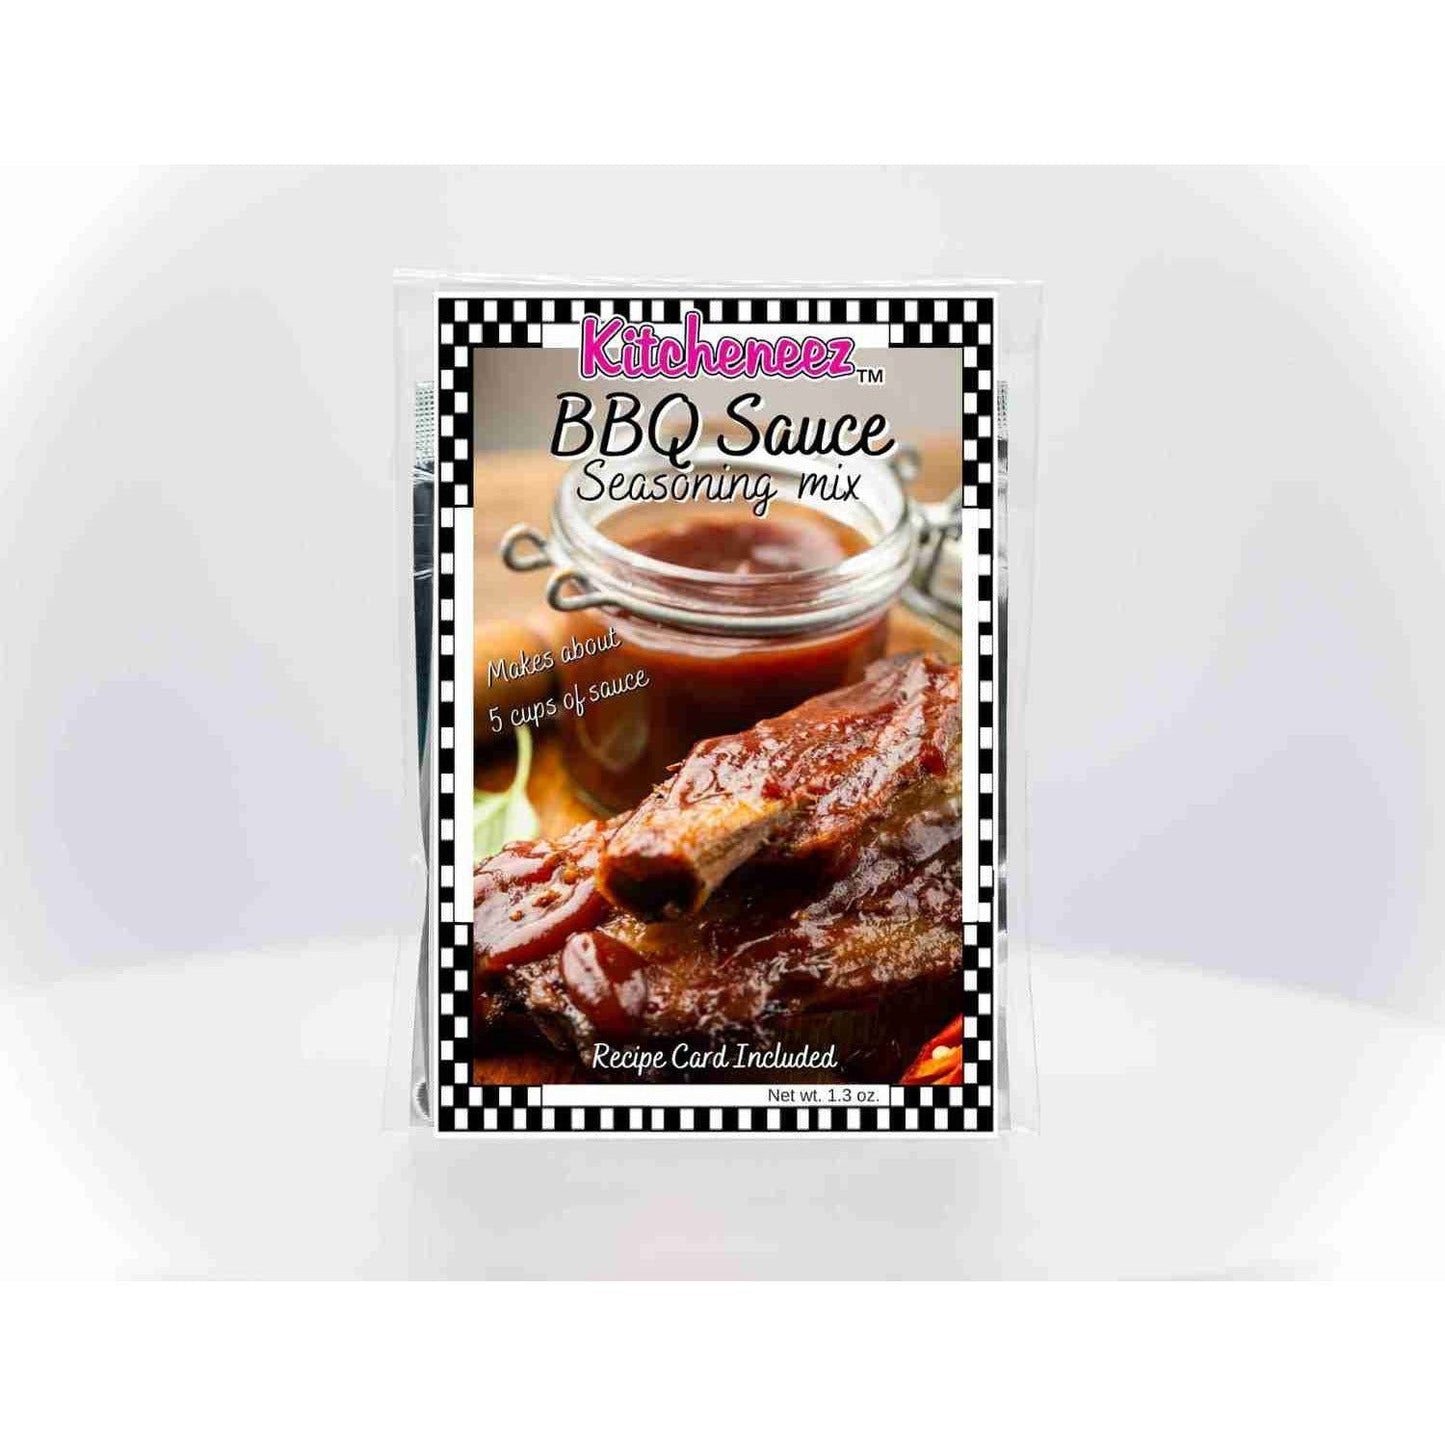 Our Prize Winning BBQ Sauce mix